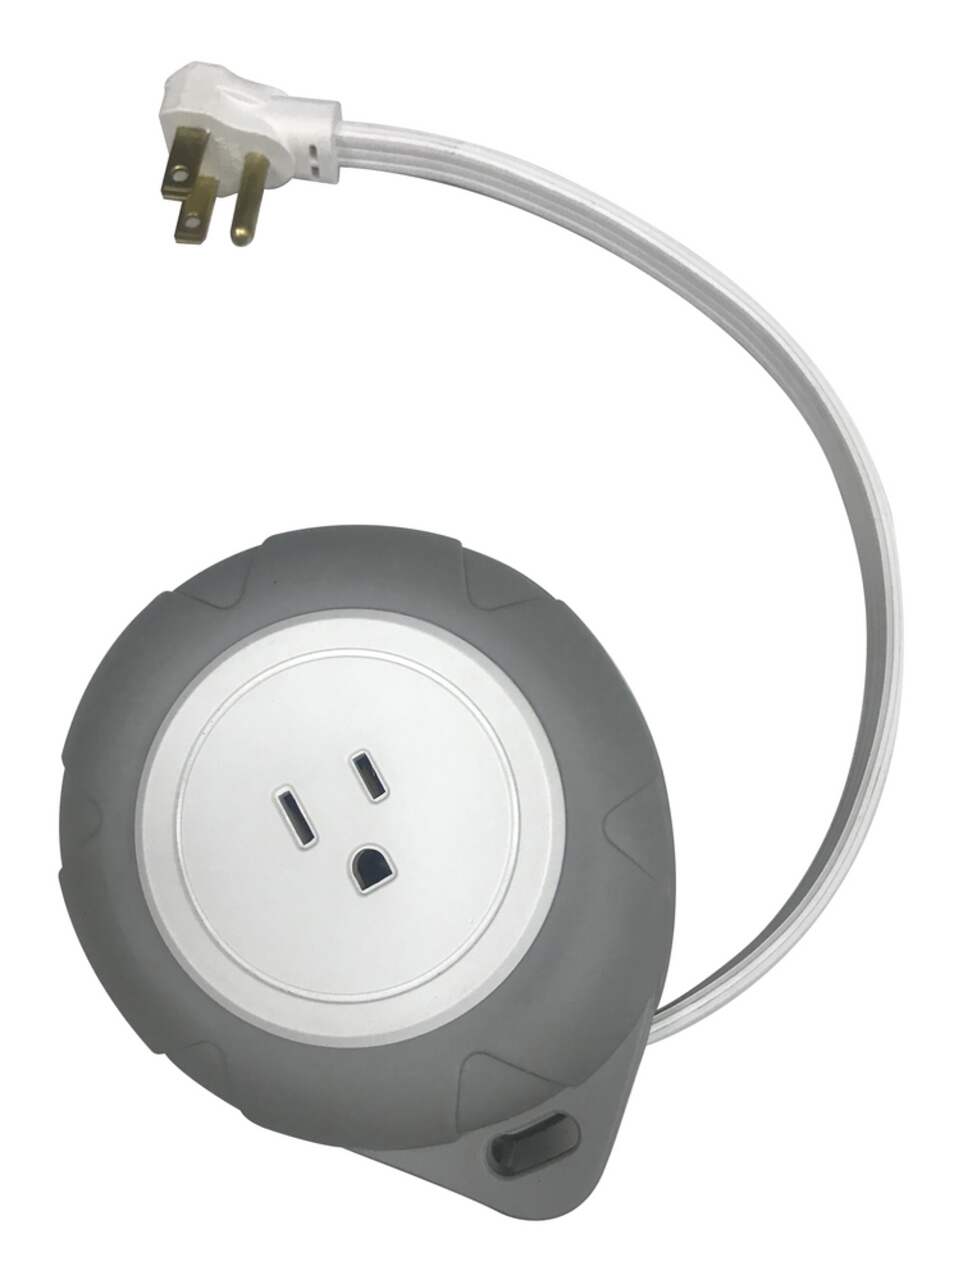 NOMA 1-Outlet and 2 USB Travel Extension Cord, 6-ft Retractable